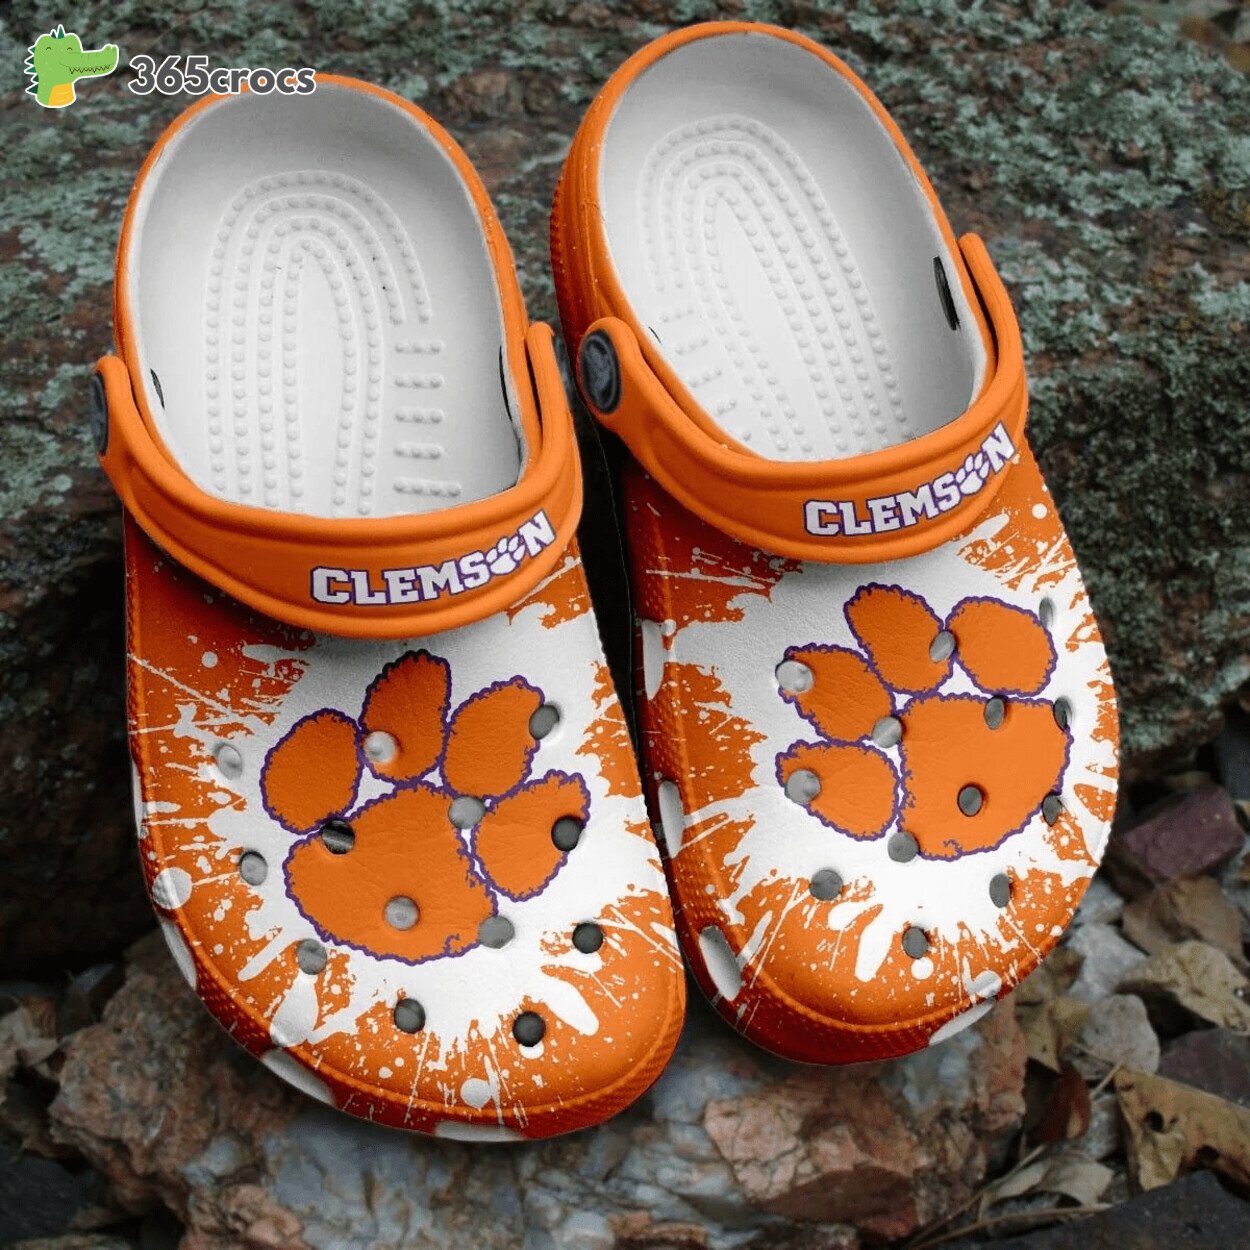 Celebrate Sports Clemson NCAA Comfort Depicted on Classic Clogs Shoes